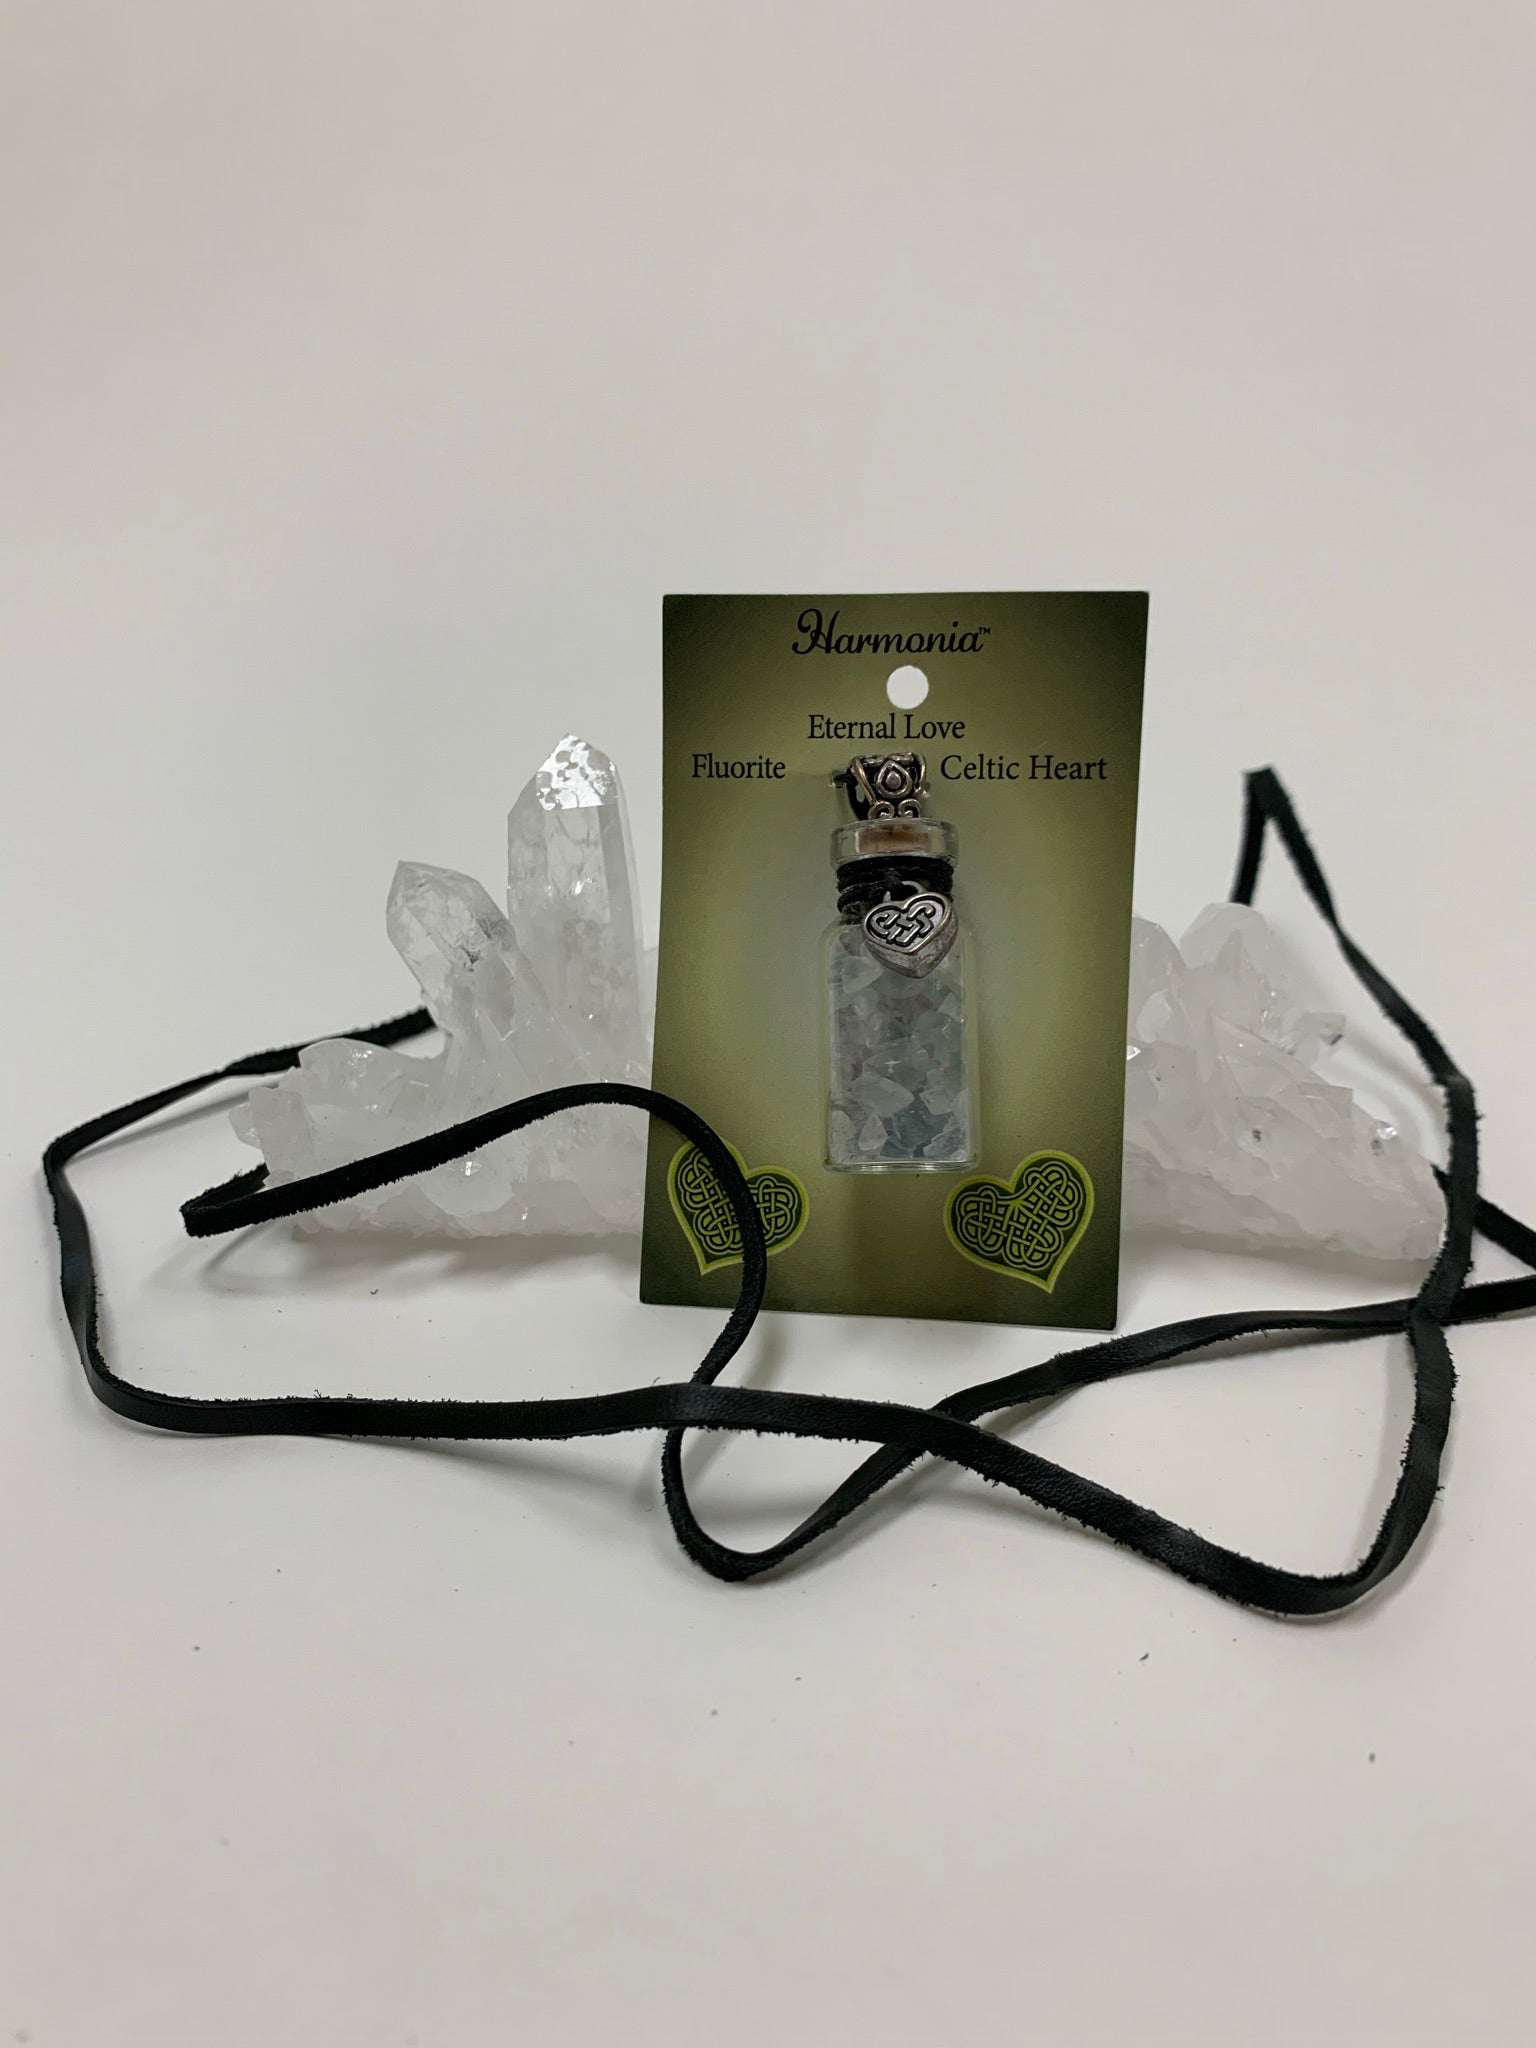 View displaying black suede cord included with the Gemstone chip (corked) bottle necklace with little fluorite chips inside and accented on the outside with a silver-colored Celtic heart and a fancy jewelry bail. It comes with a thin black suede cord so the bottle can be worn as a necklace.